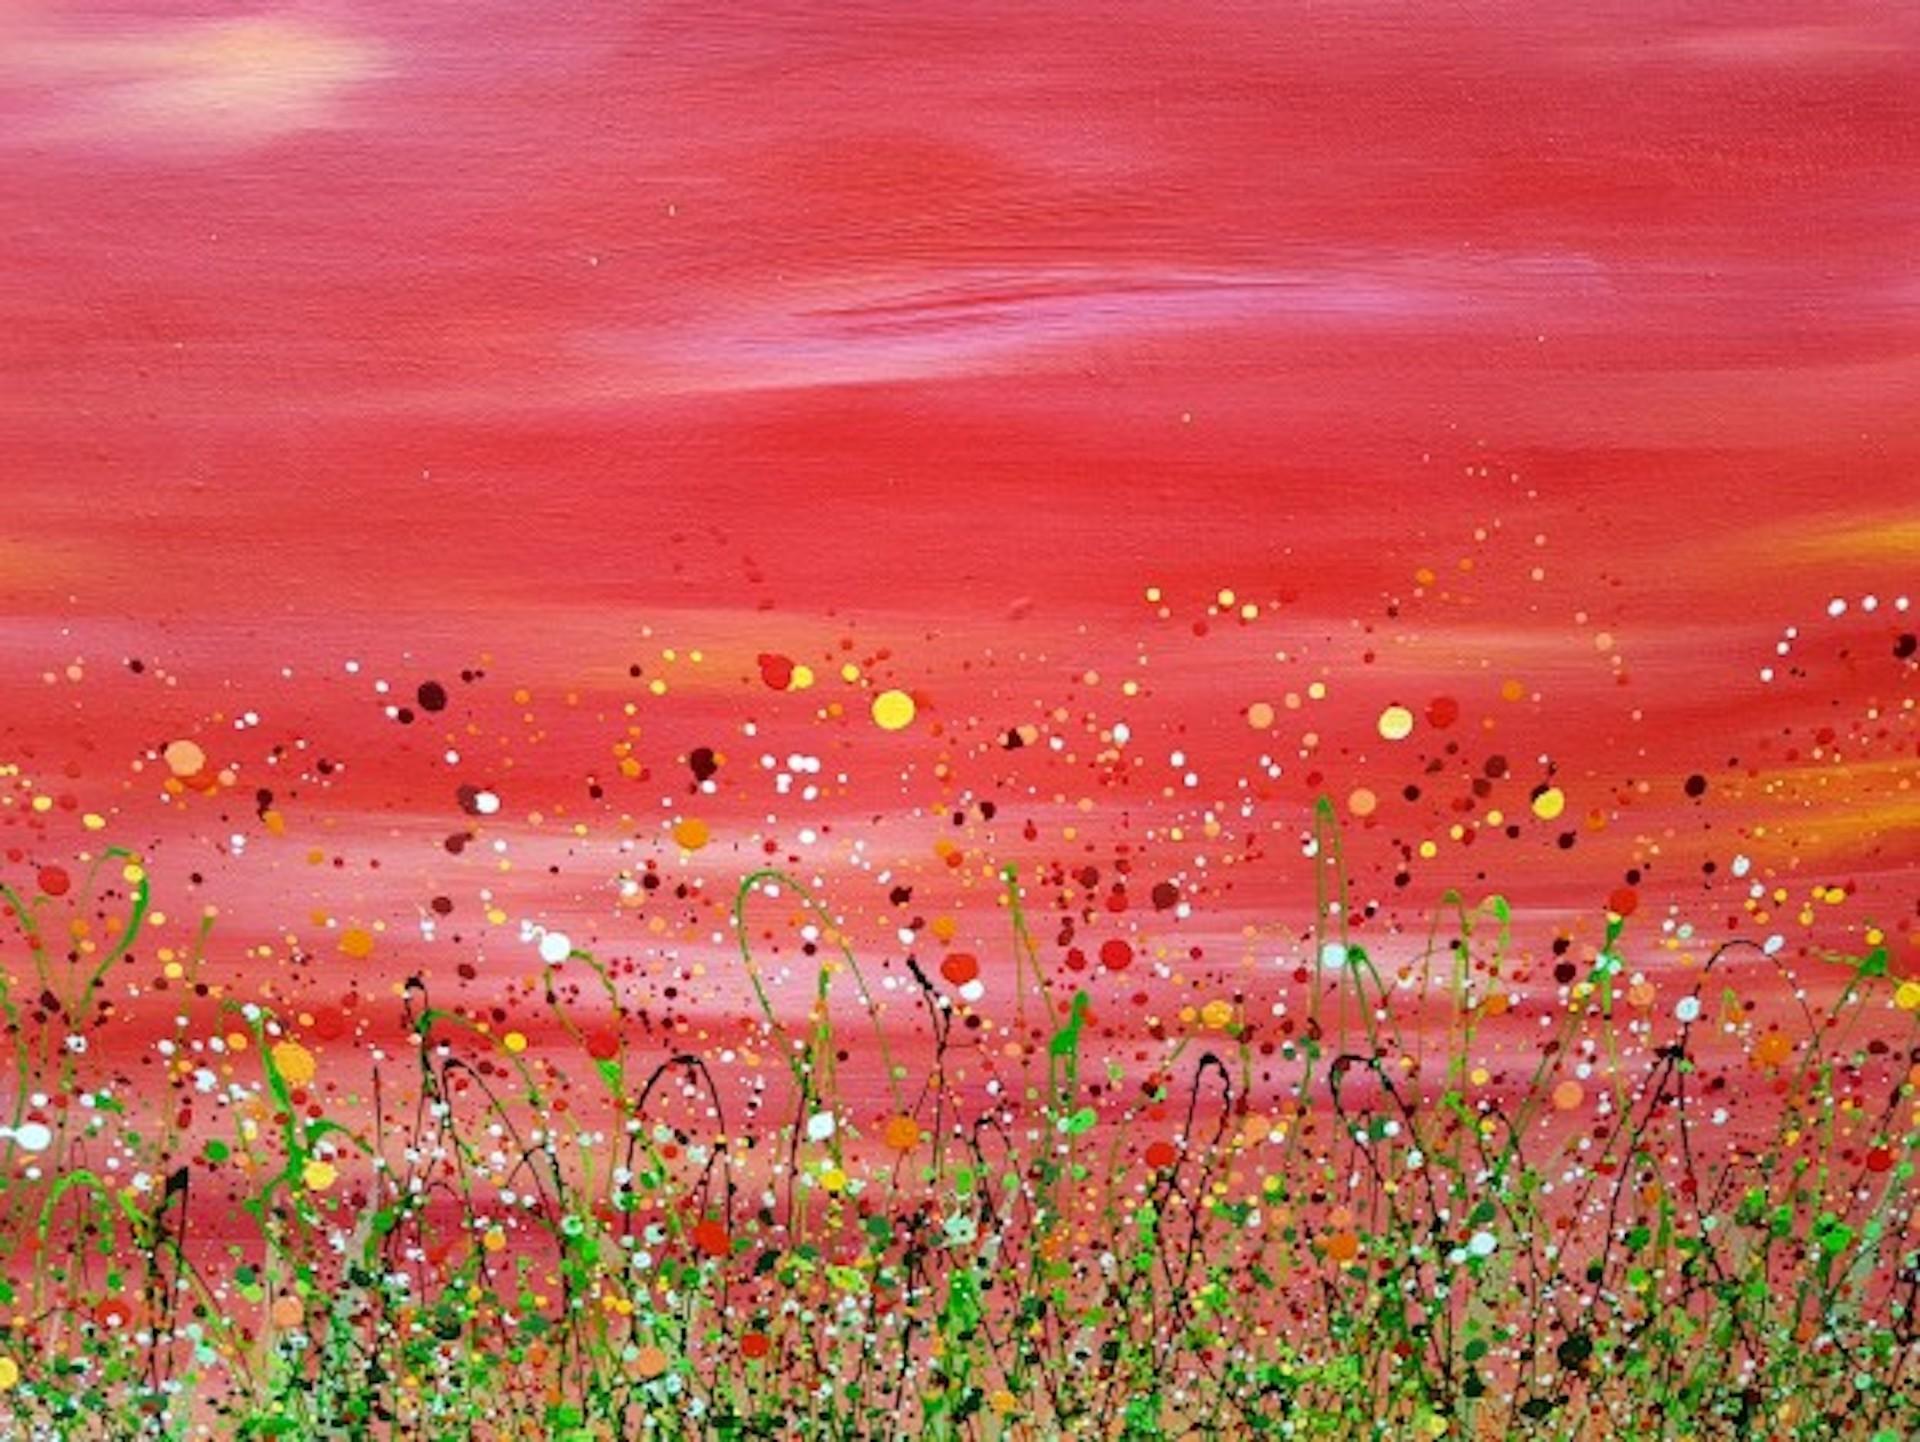 Red Sky At Night #6 – Wychwood Exclusive by Lucy Moore [2021]
Original
Acrylic On canvas
Image size: H:60 cm x W:80 cm
Complete Size of Unframed Work: H:60 cm x W:80 cm x D:3.5cm
Sold Unframed
Please note that insitu images are purely an indication